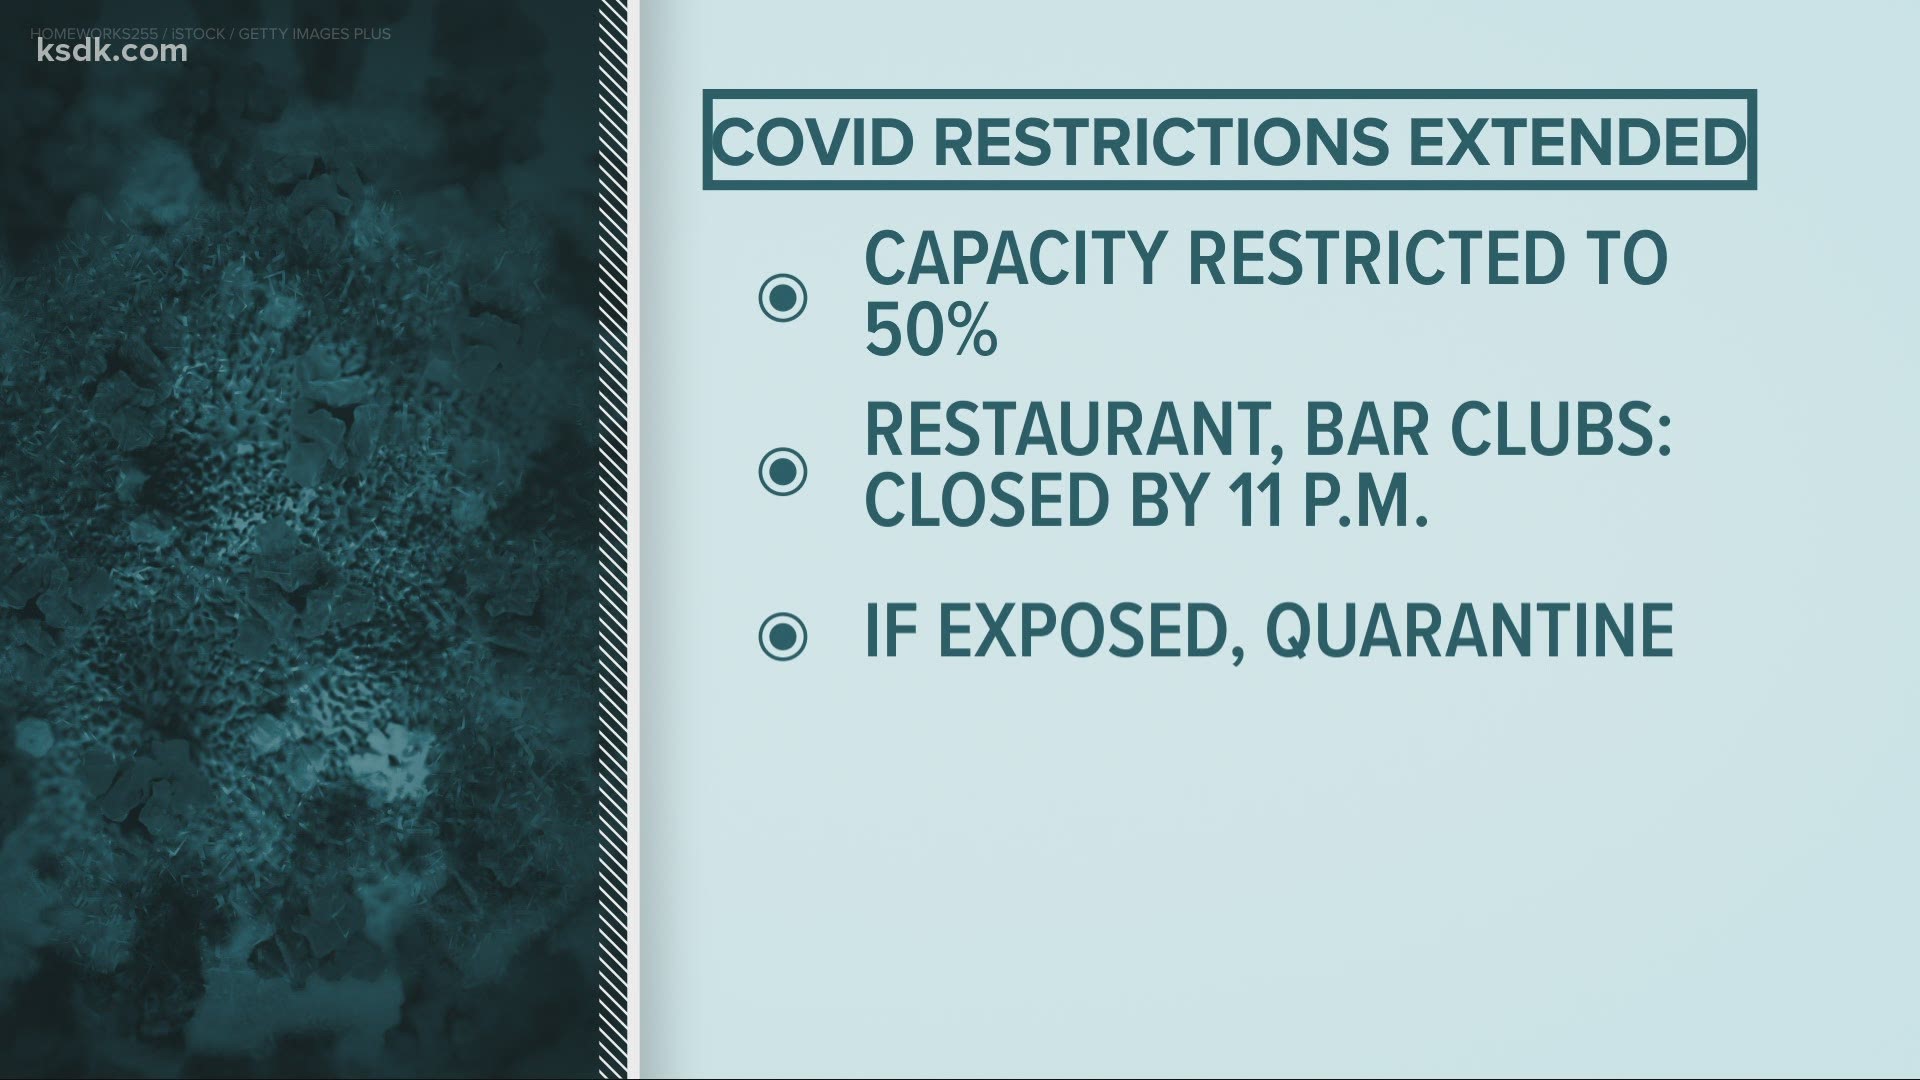 Restaurants, bars and clubs - any big venue really - will be limited to 50% capacity. They'll have to close by 11 p.m., too.